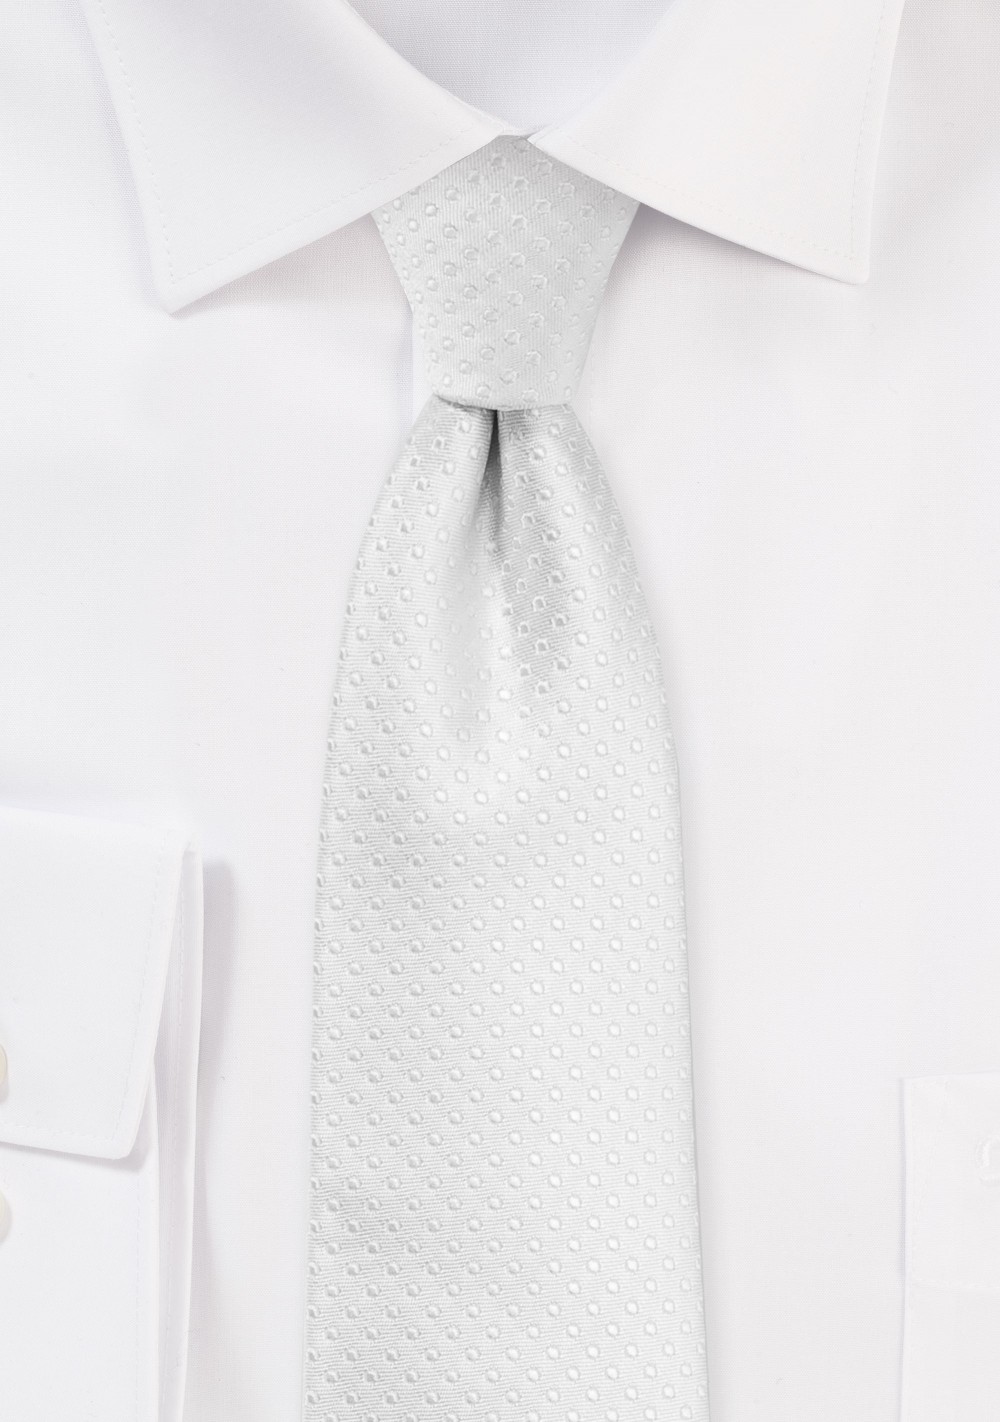 Skinny White Tie with Pin Dots | Cheap-Neckties.com